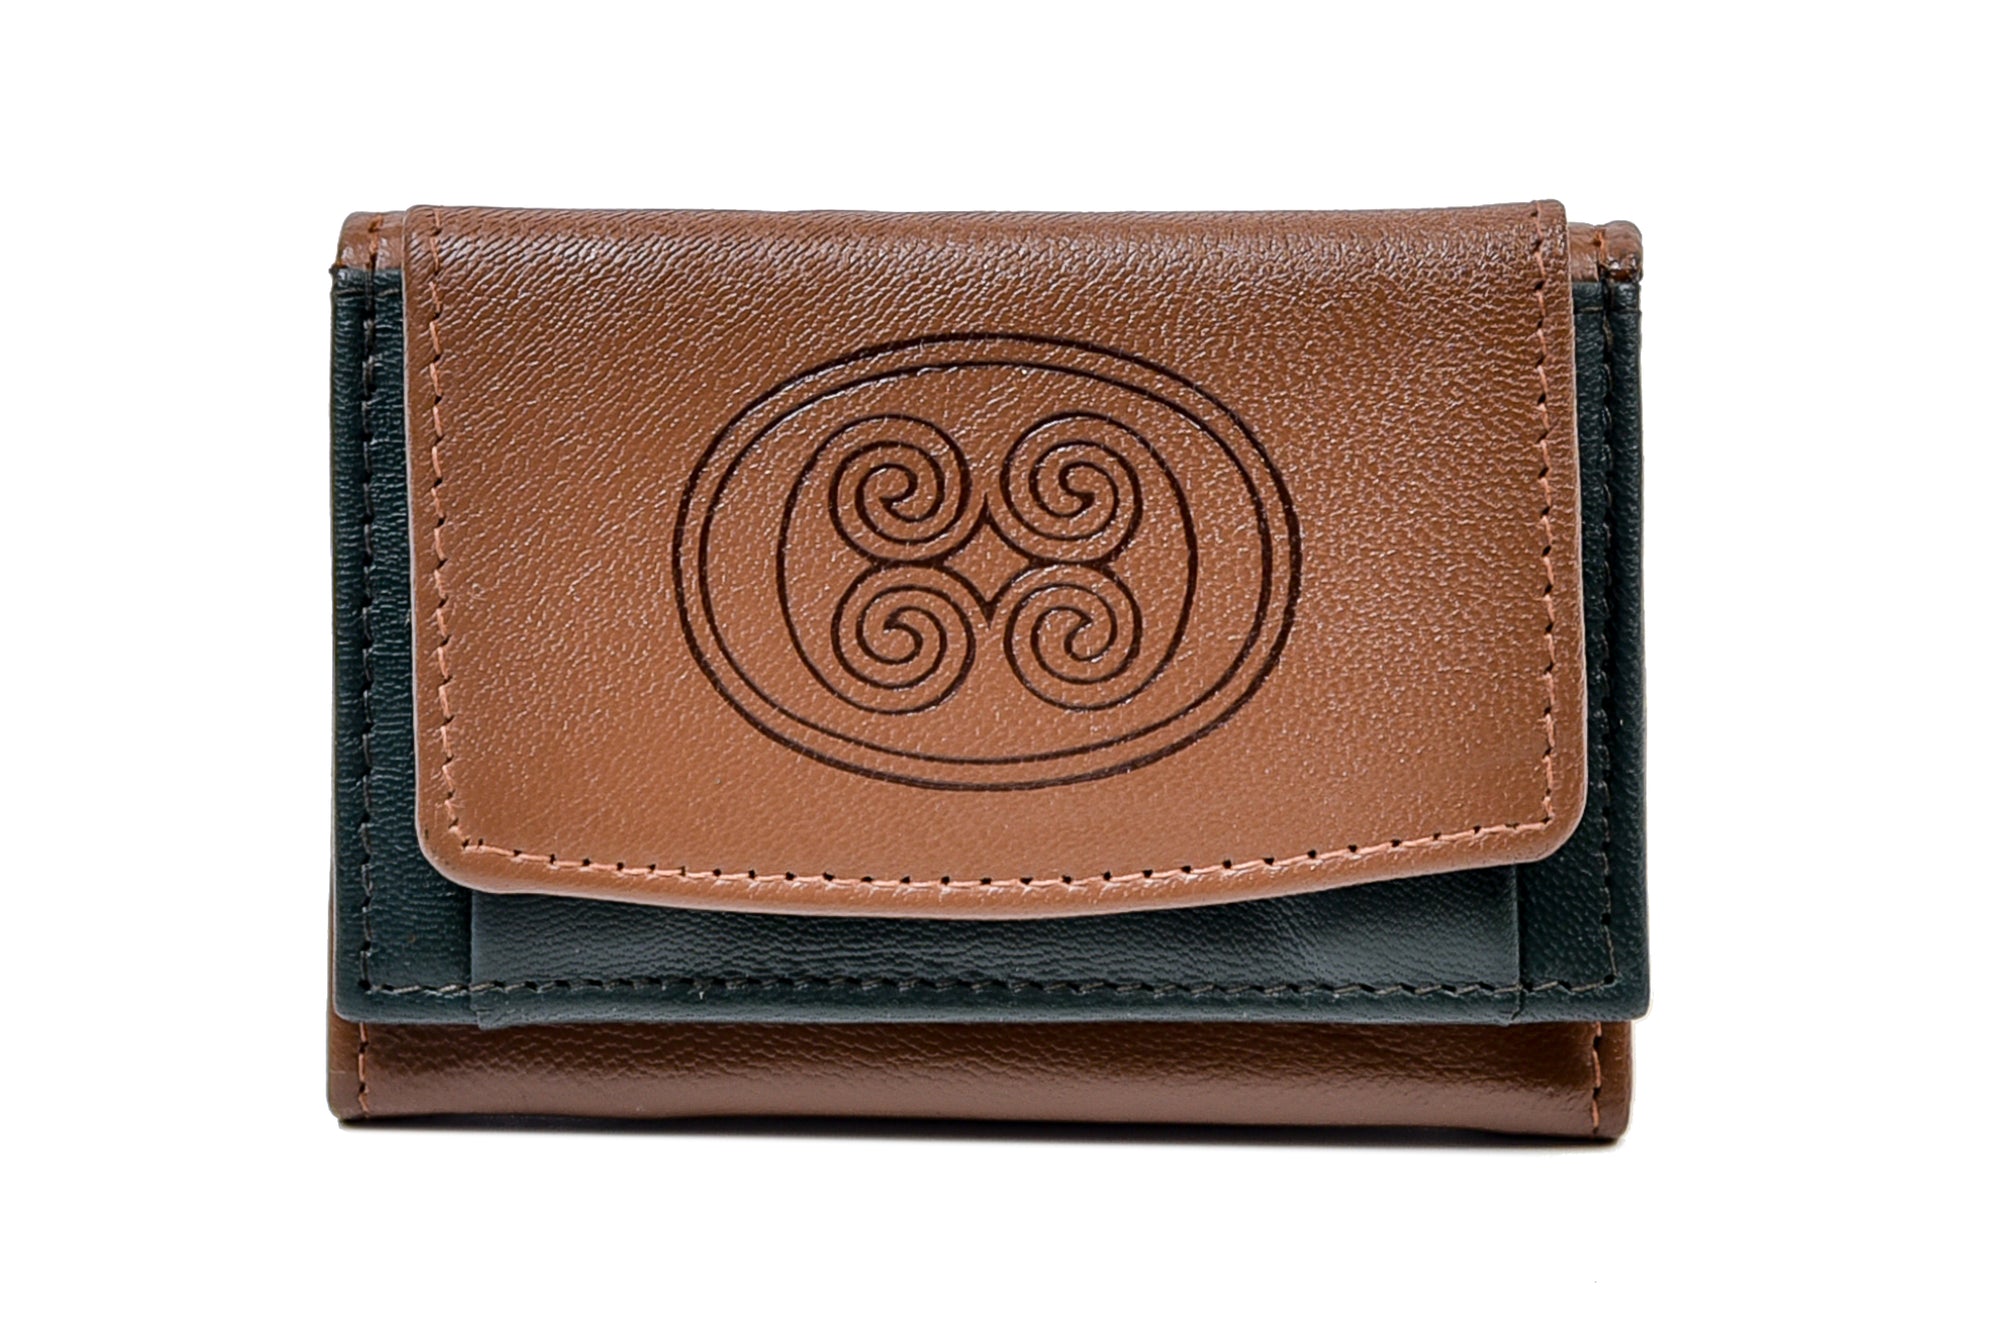 🆕 Roundtree & Yorke Tan Leather Trifold Wallet in logo'd Giftable Tin